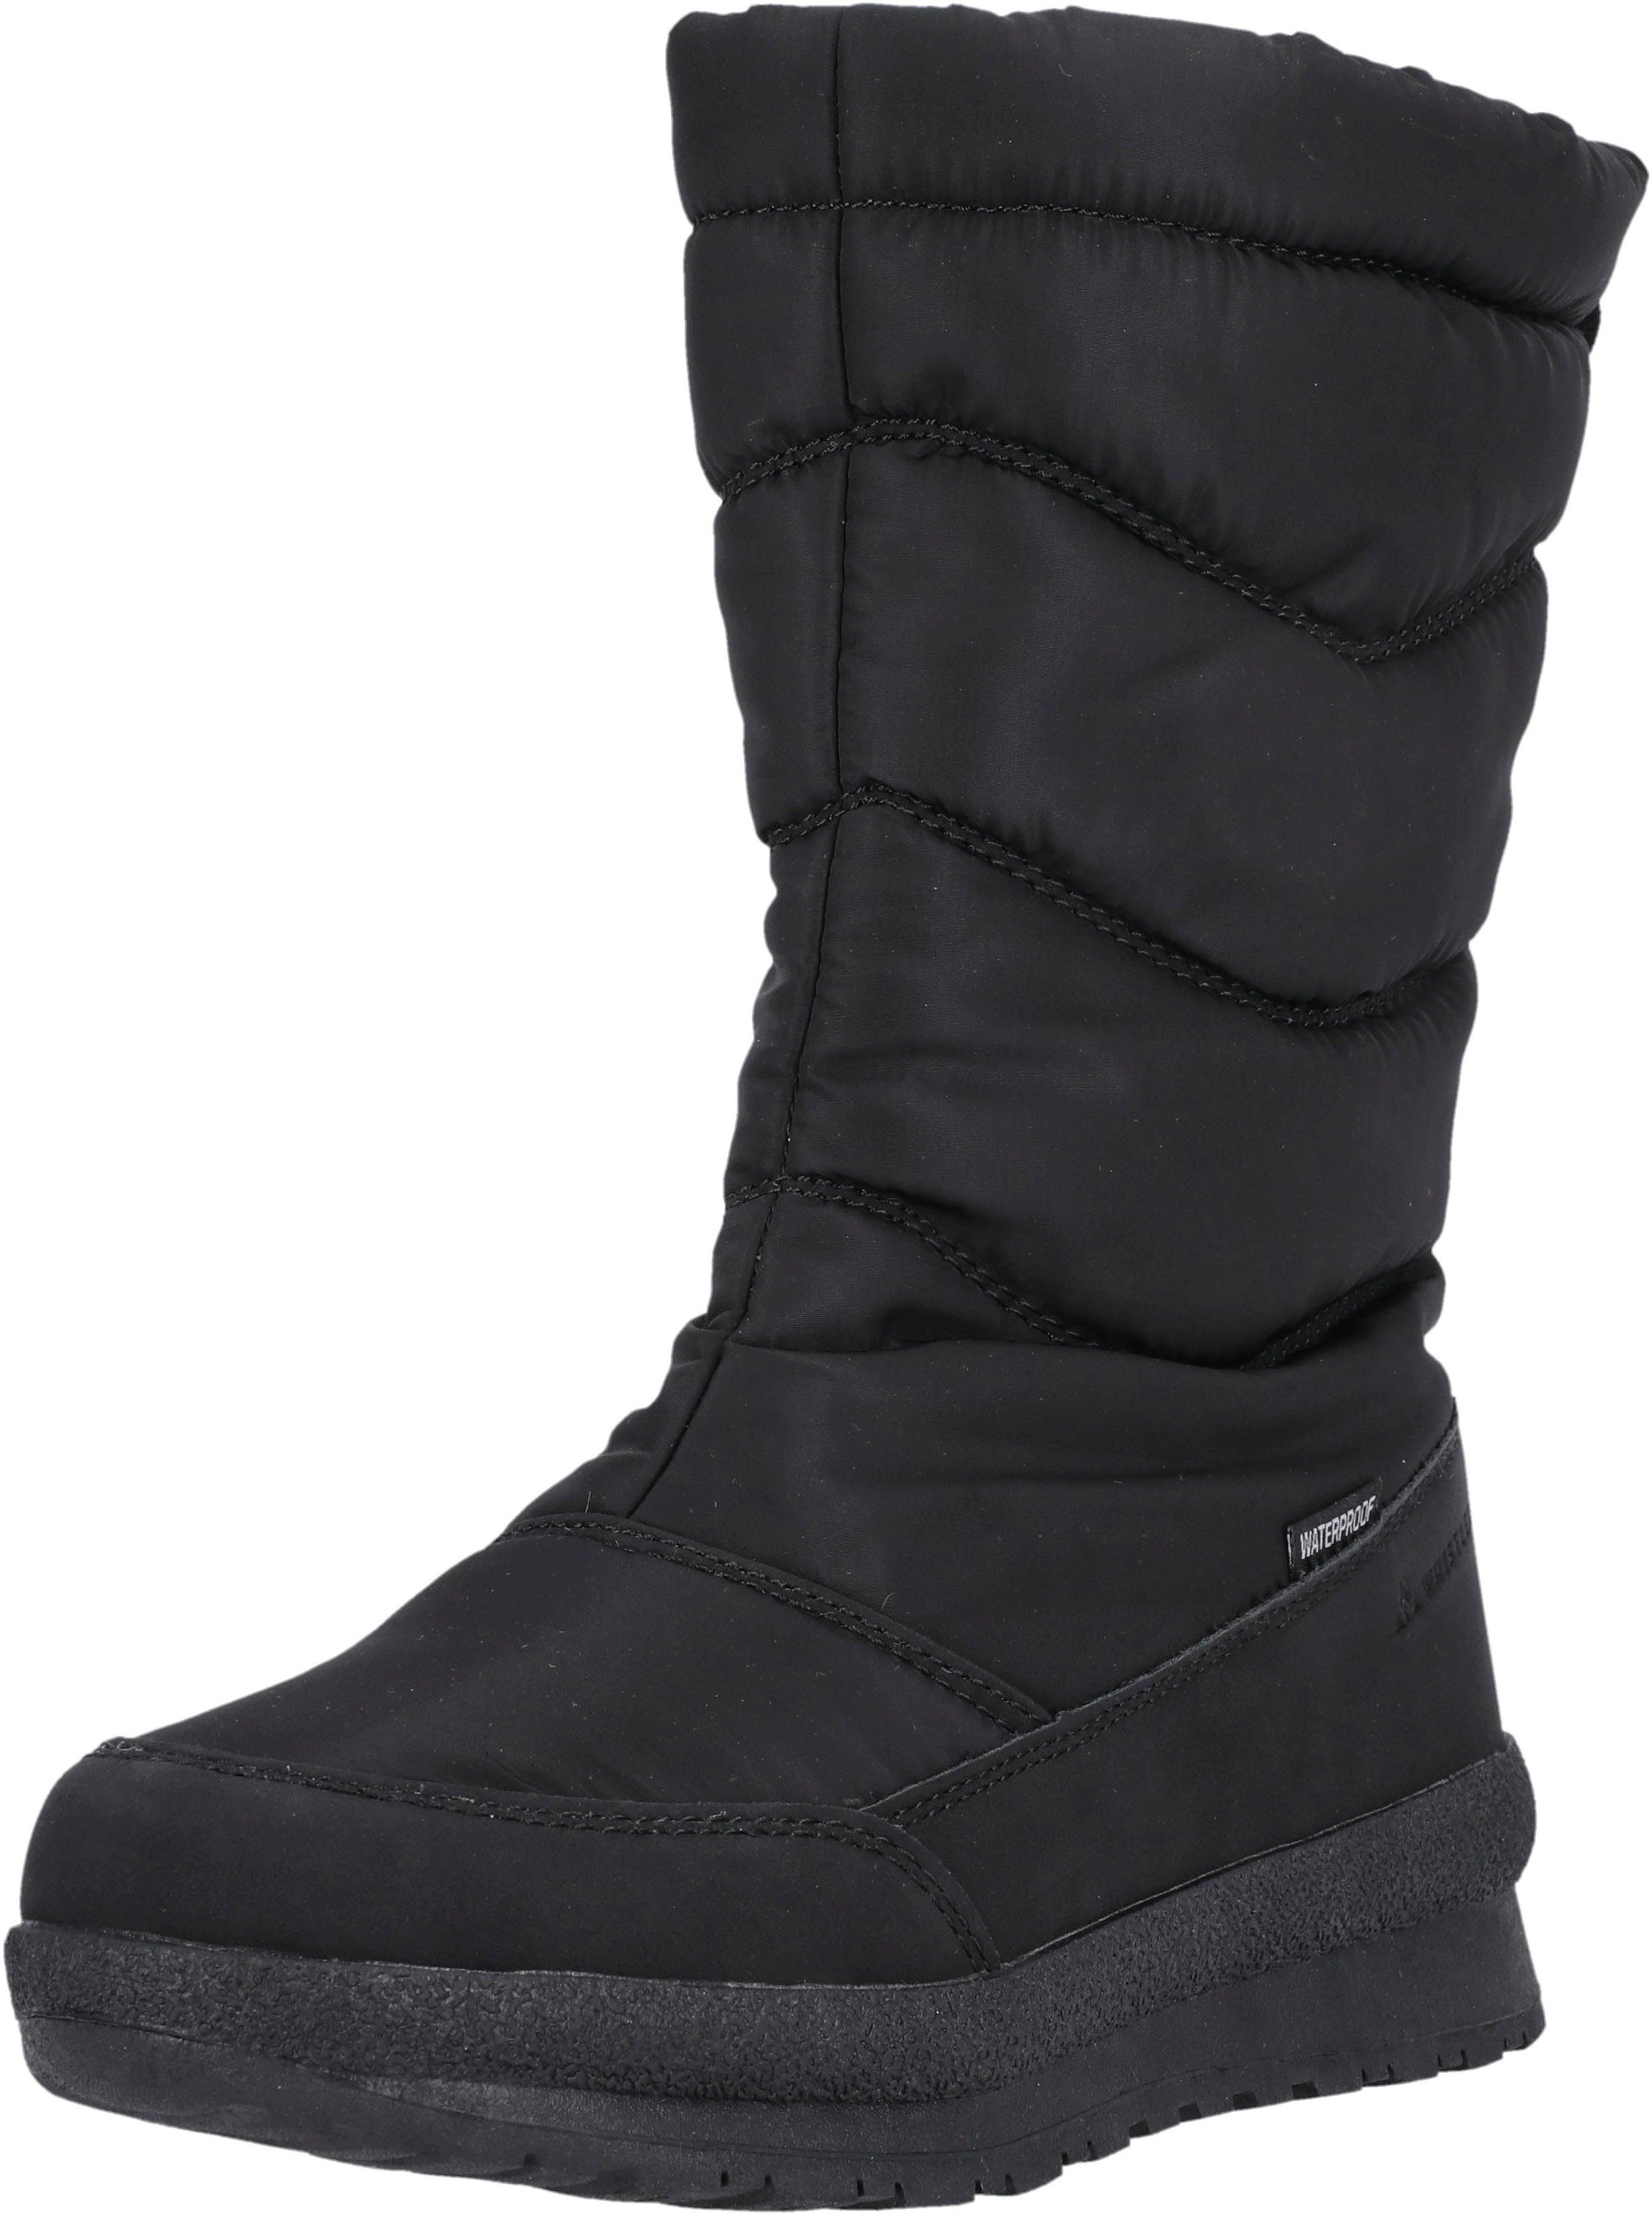 Warmfutter Winterboots WHISTLER WHW234153